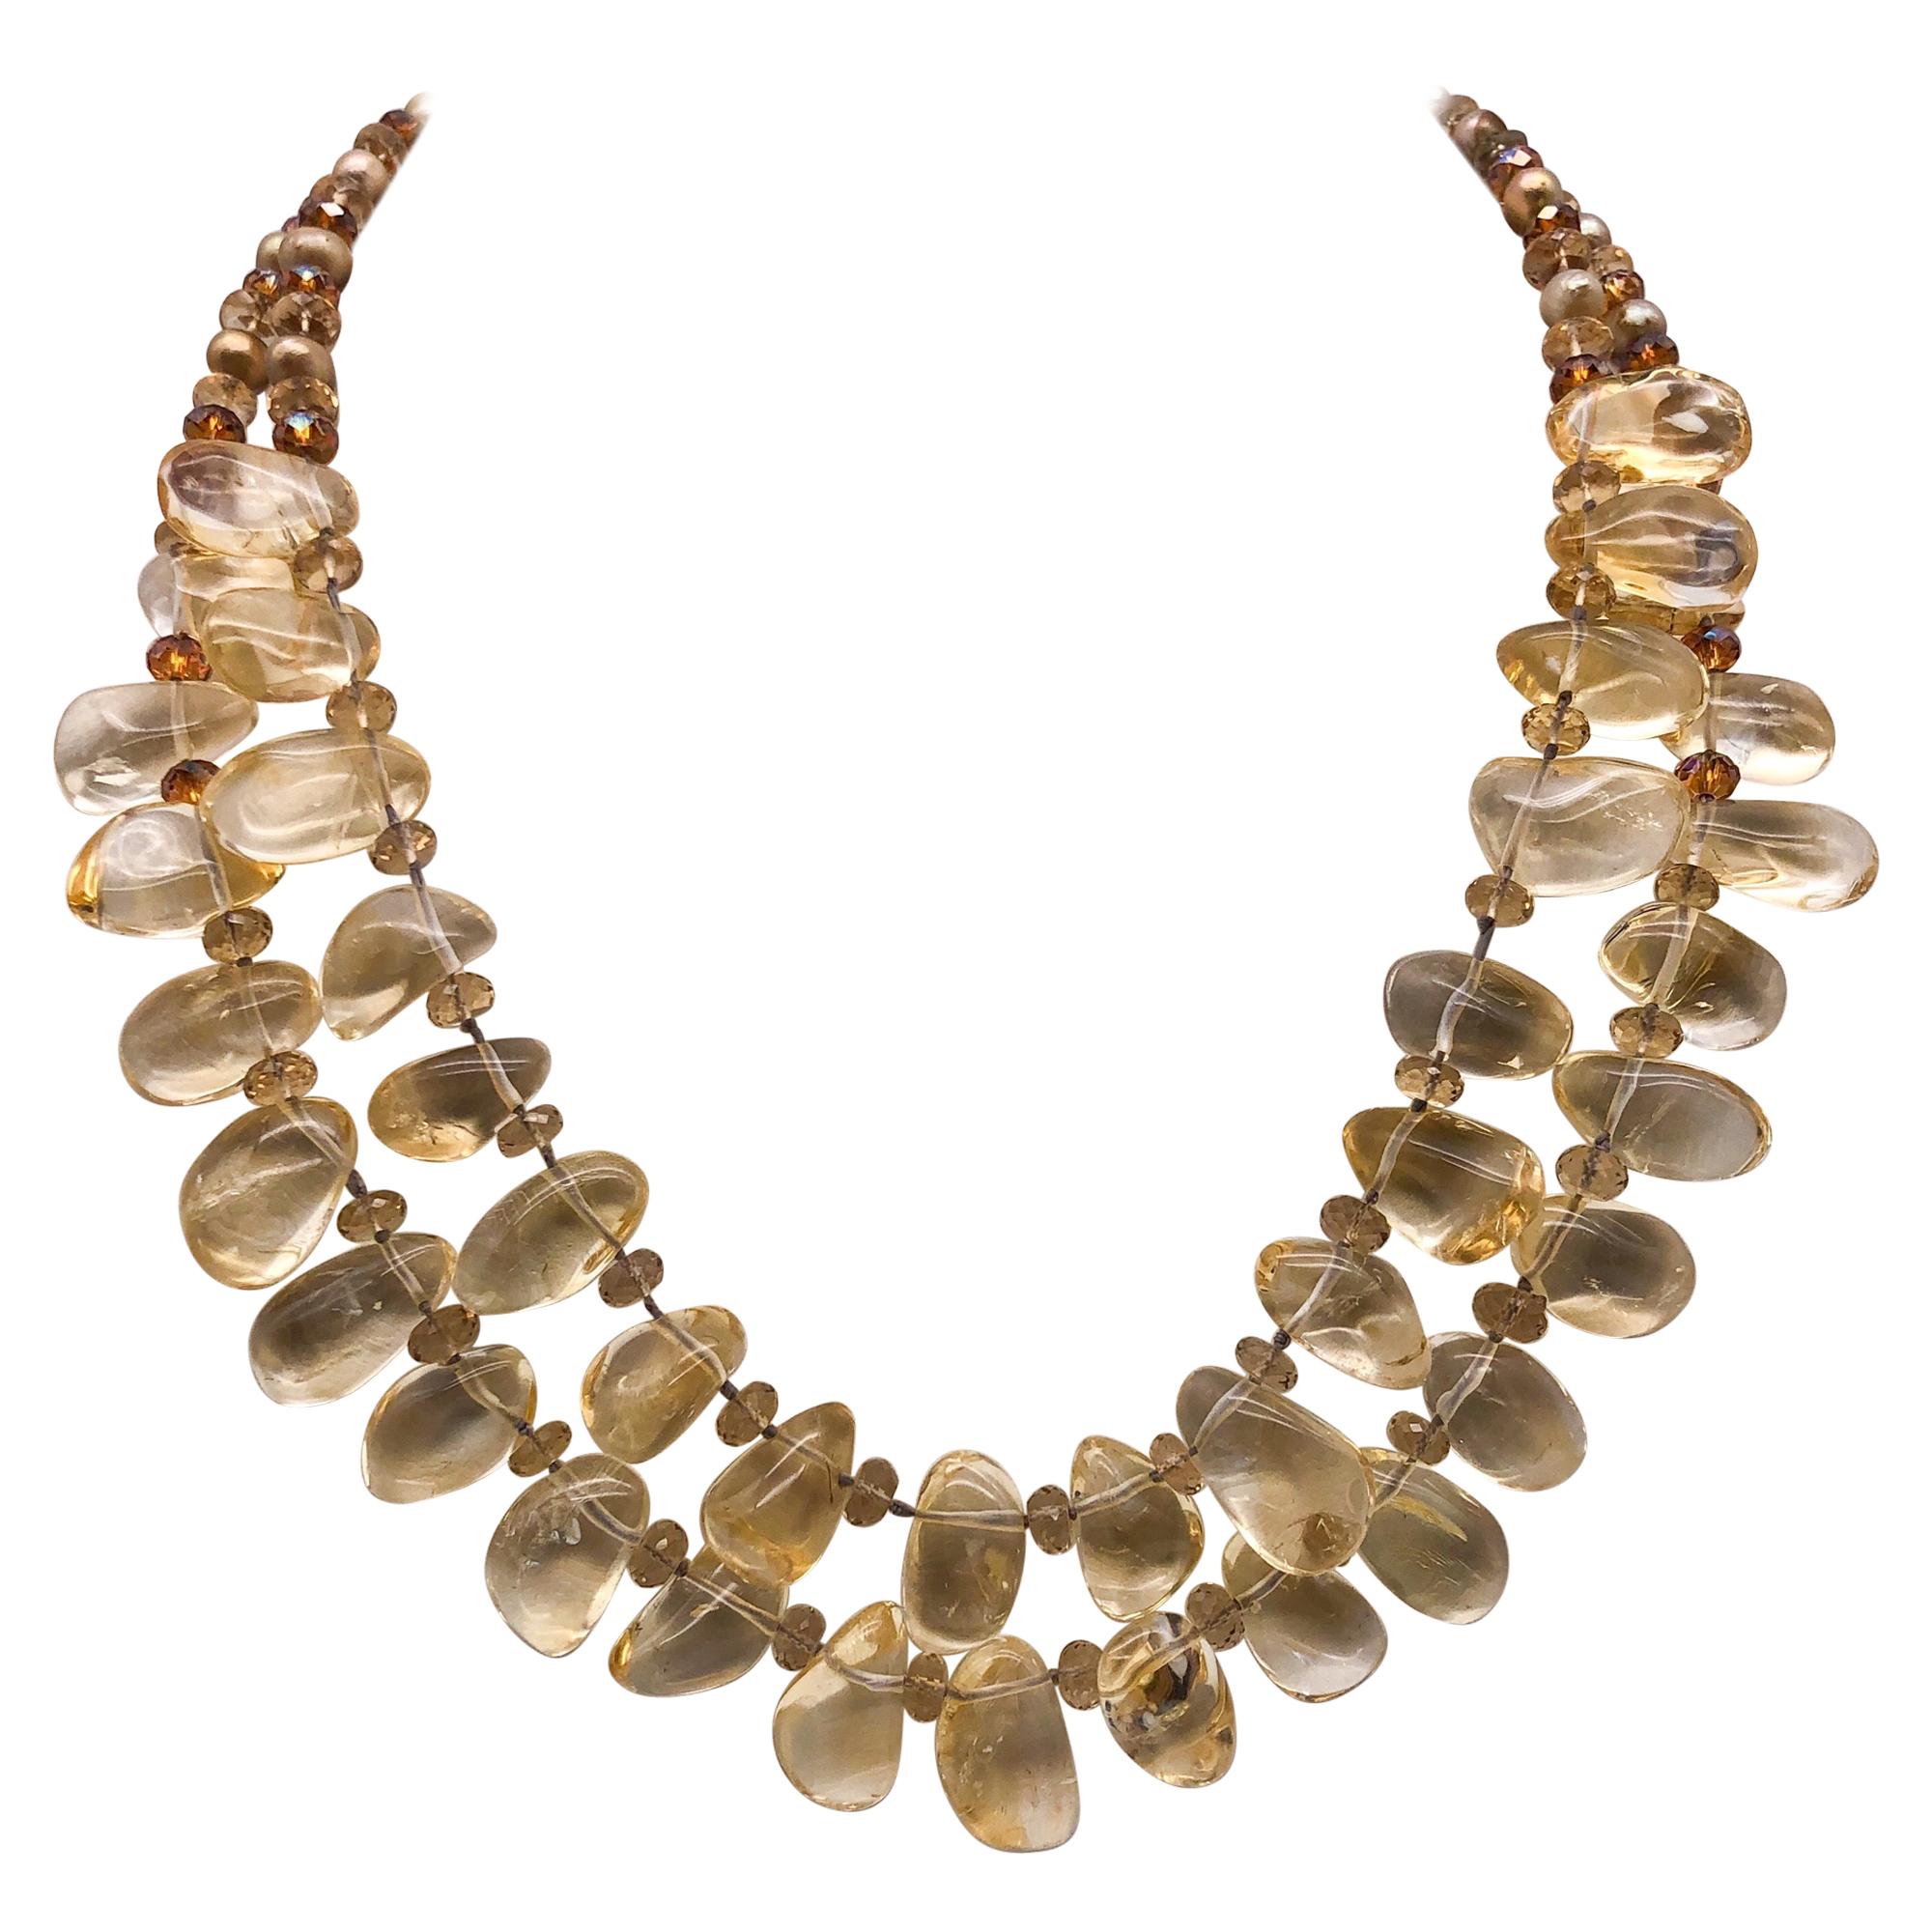 A.Jeschel 2 strand Citrine and Pearl necklace. 